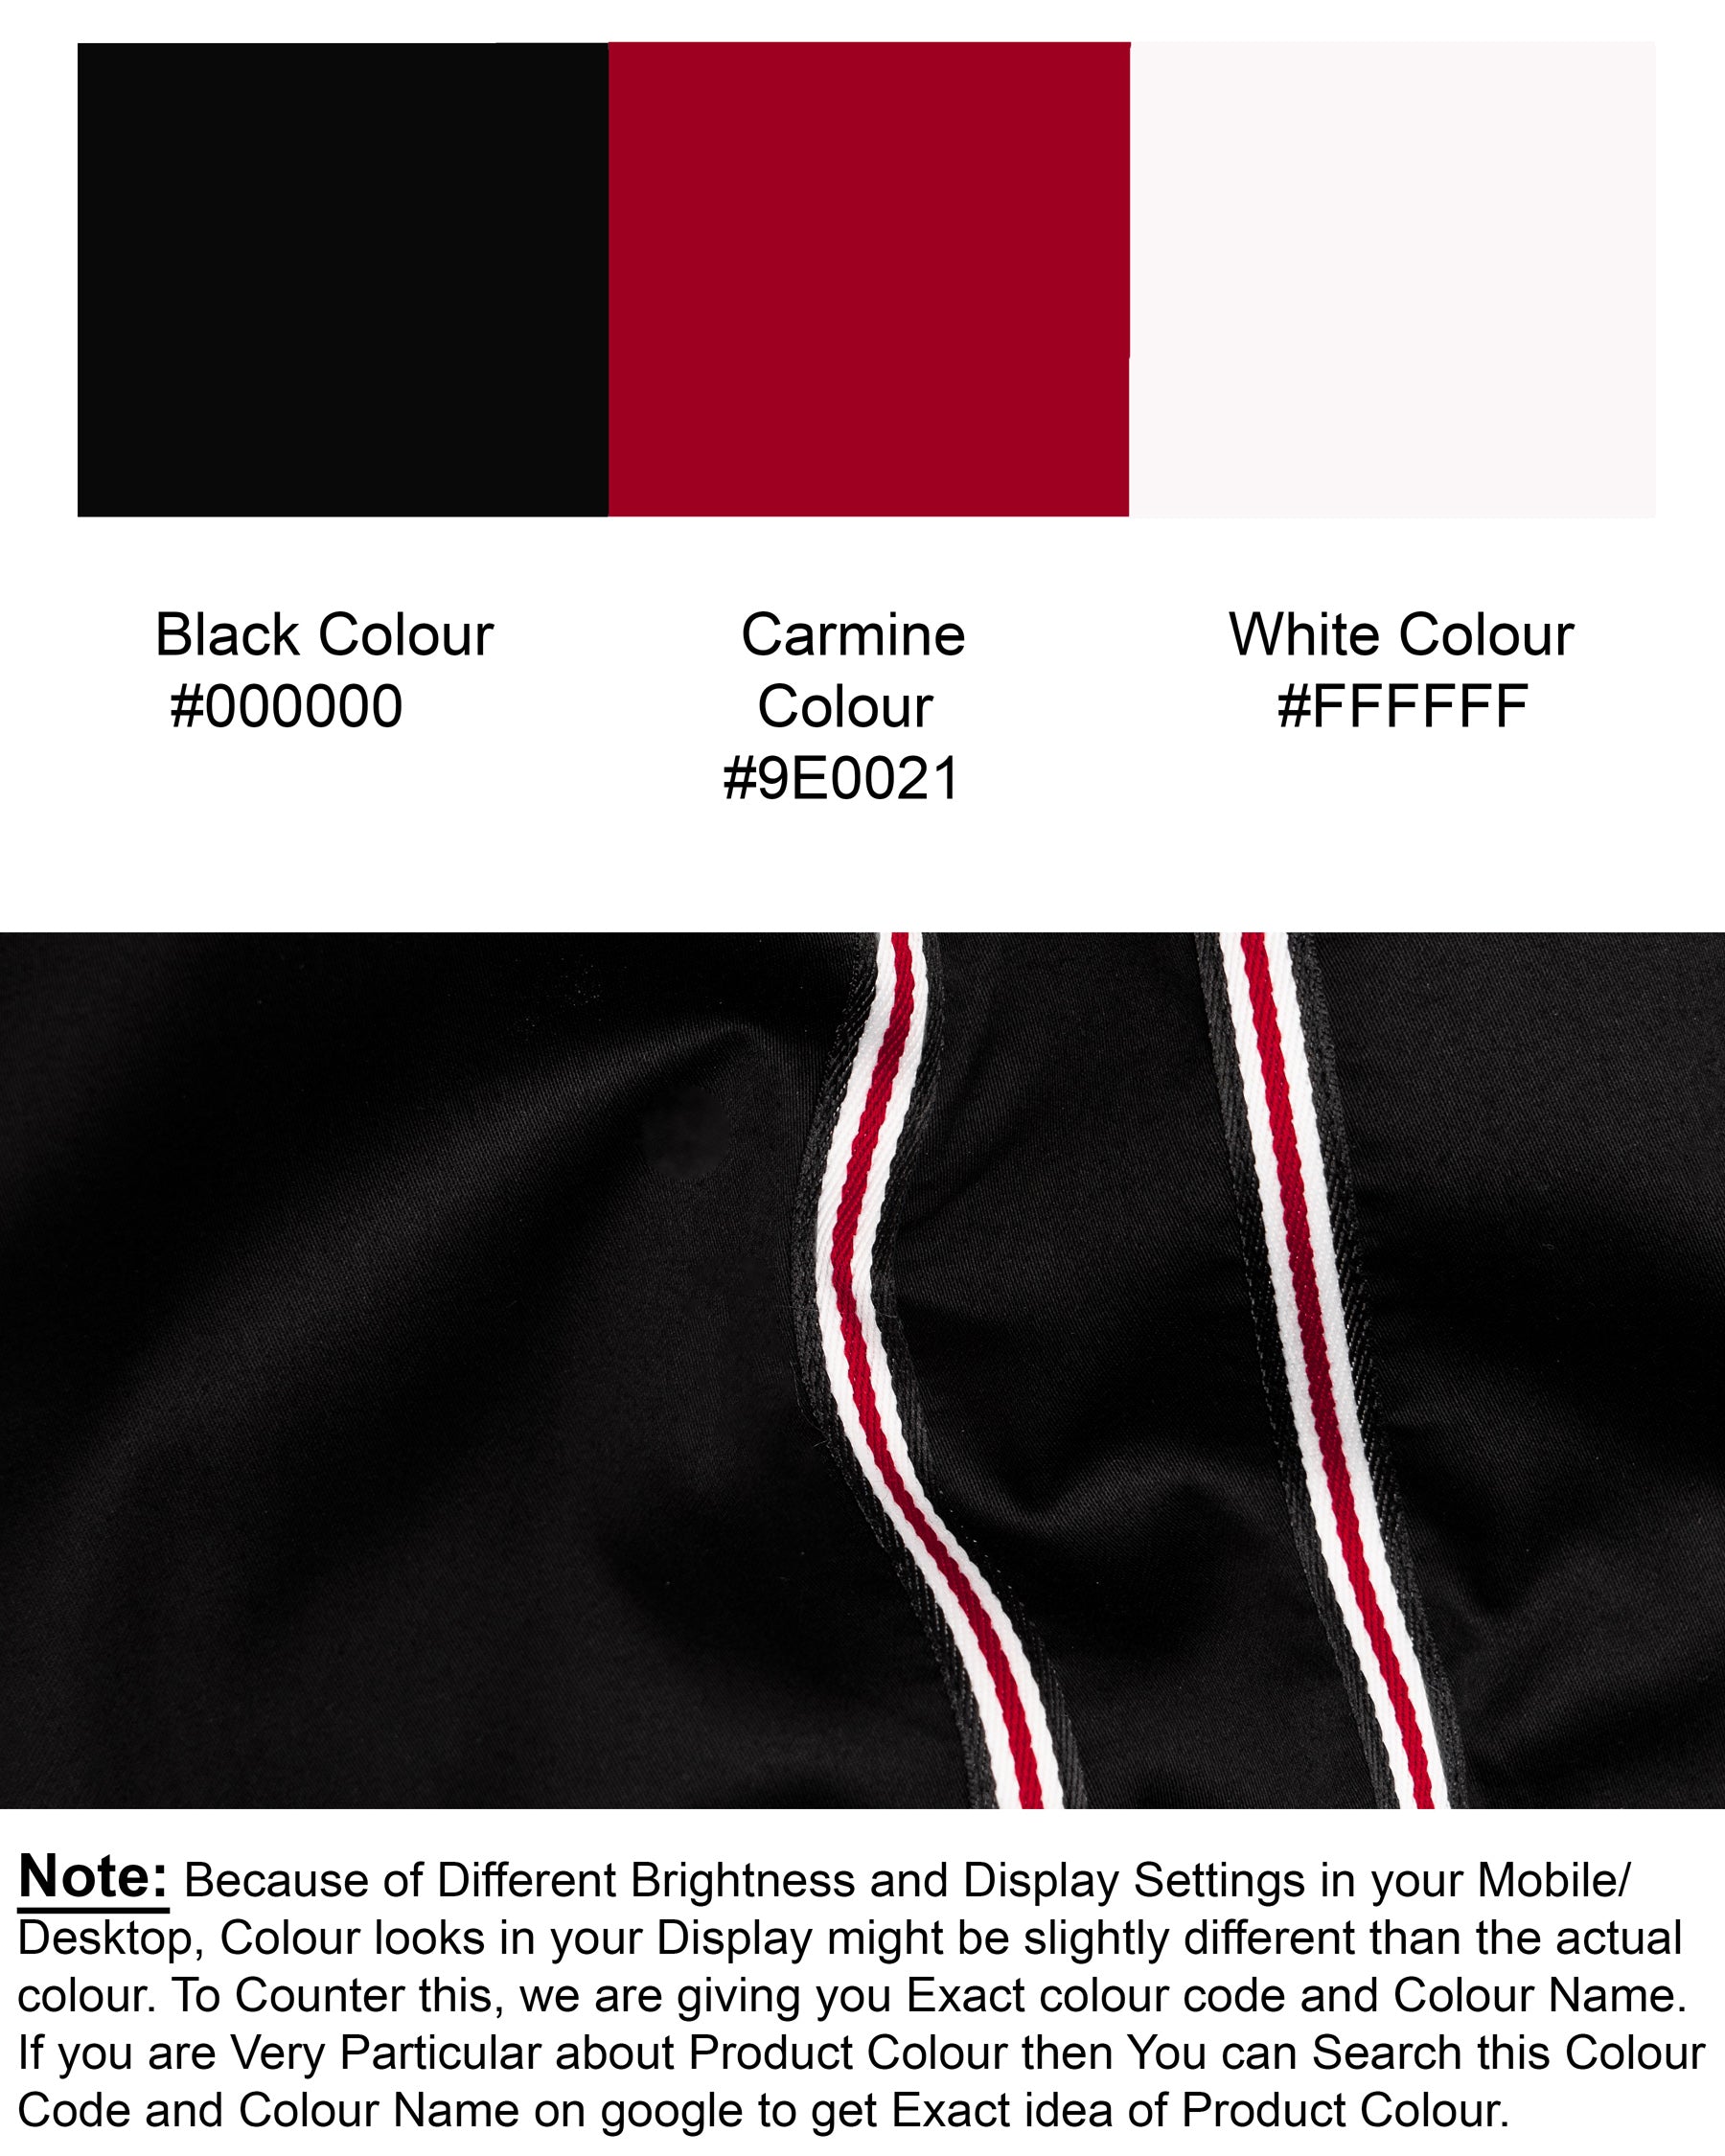 Jade Black with Carmine Red and Trimming Patterned Premium Satin Shirt 5082-BLK-P53-38, 5082-BLK-P53-H-38, 5082-BLK-P53-39, 5082-BLK-P53-H-39, 5082-BLK-P53-40, 5082-BLK-P53-H-40, 5082-BLK-P53-42, 5082-BLK-P53-H-42, 5082-BLK-P53-44, 5082-BLK-P53-H-44, 5082-BLK-P53-46, 5082-BLK-P53-H-46, 5082-BLK-P53-48, 5082-BLK-P53-H-48, 5082-BLK-P53-50, 5082-BLK-P53-H-50, 5082-BLK-P53-52, 5082-BLK-P53-H-52